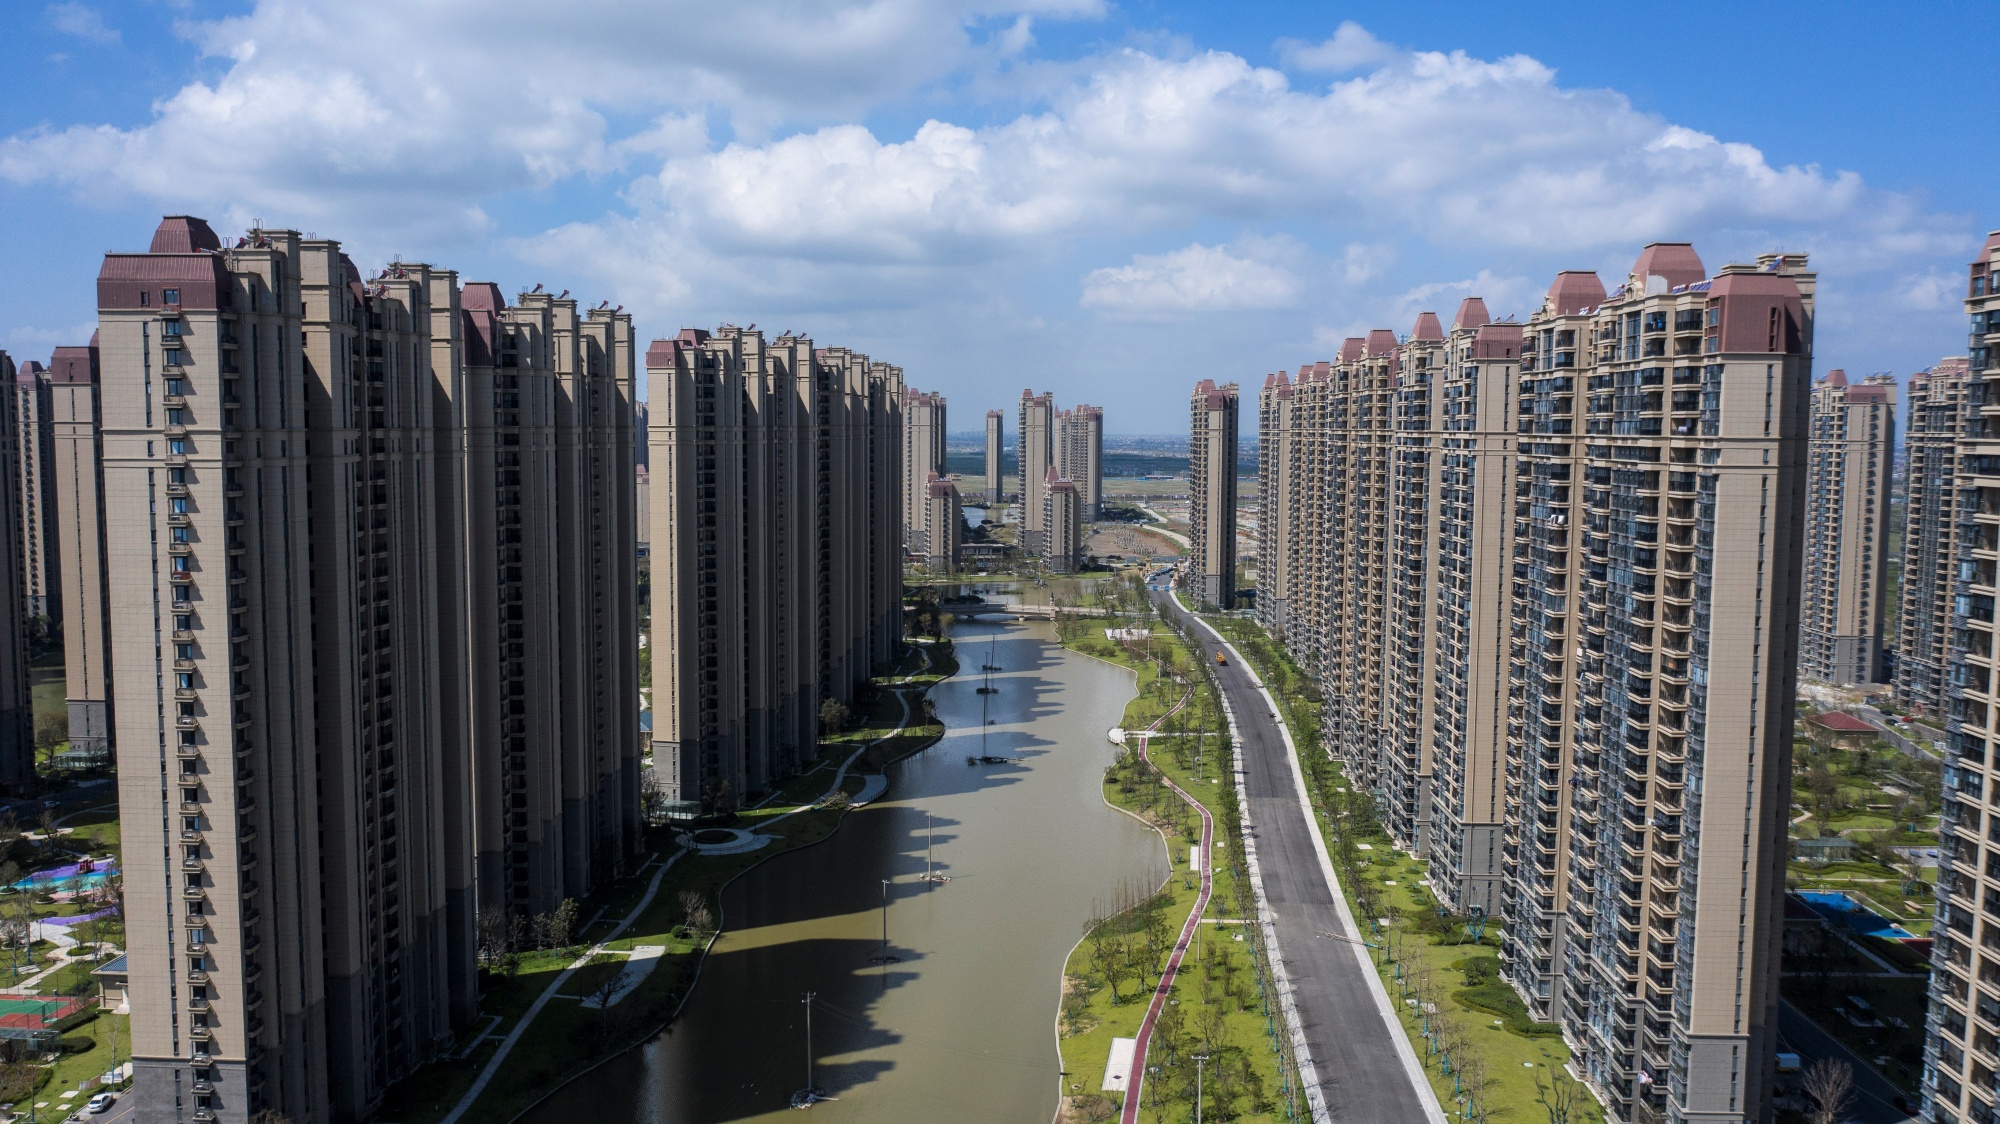 China has built a lot more property than it needs, and that’s a problem.